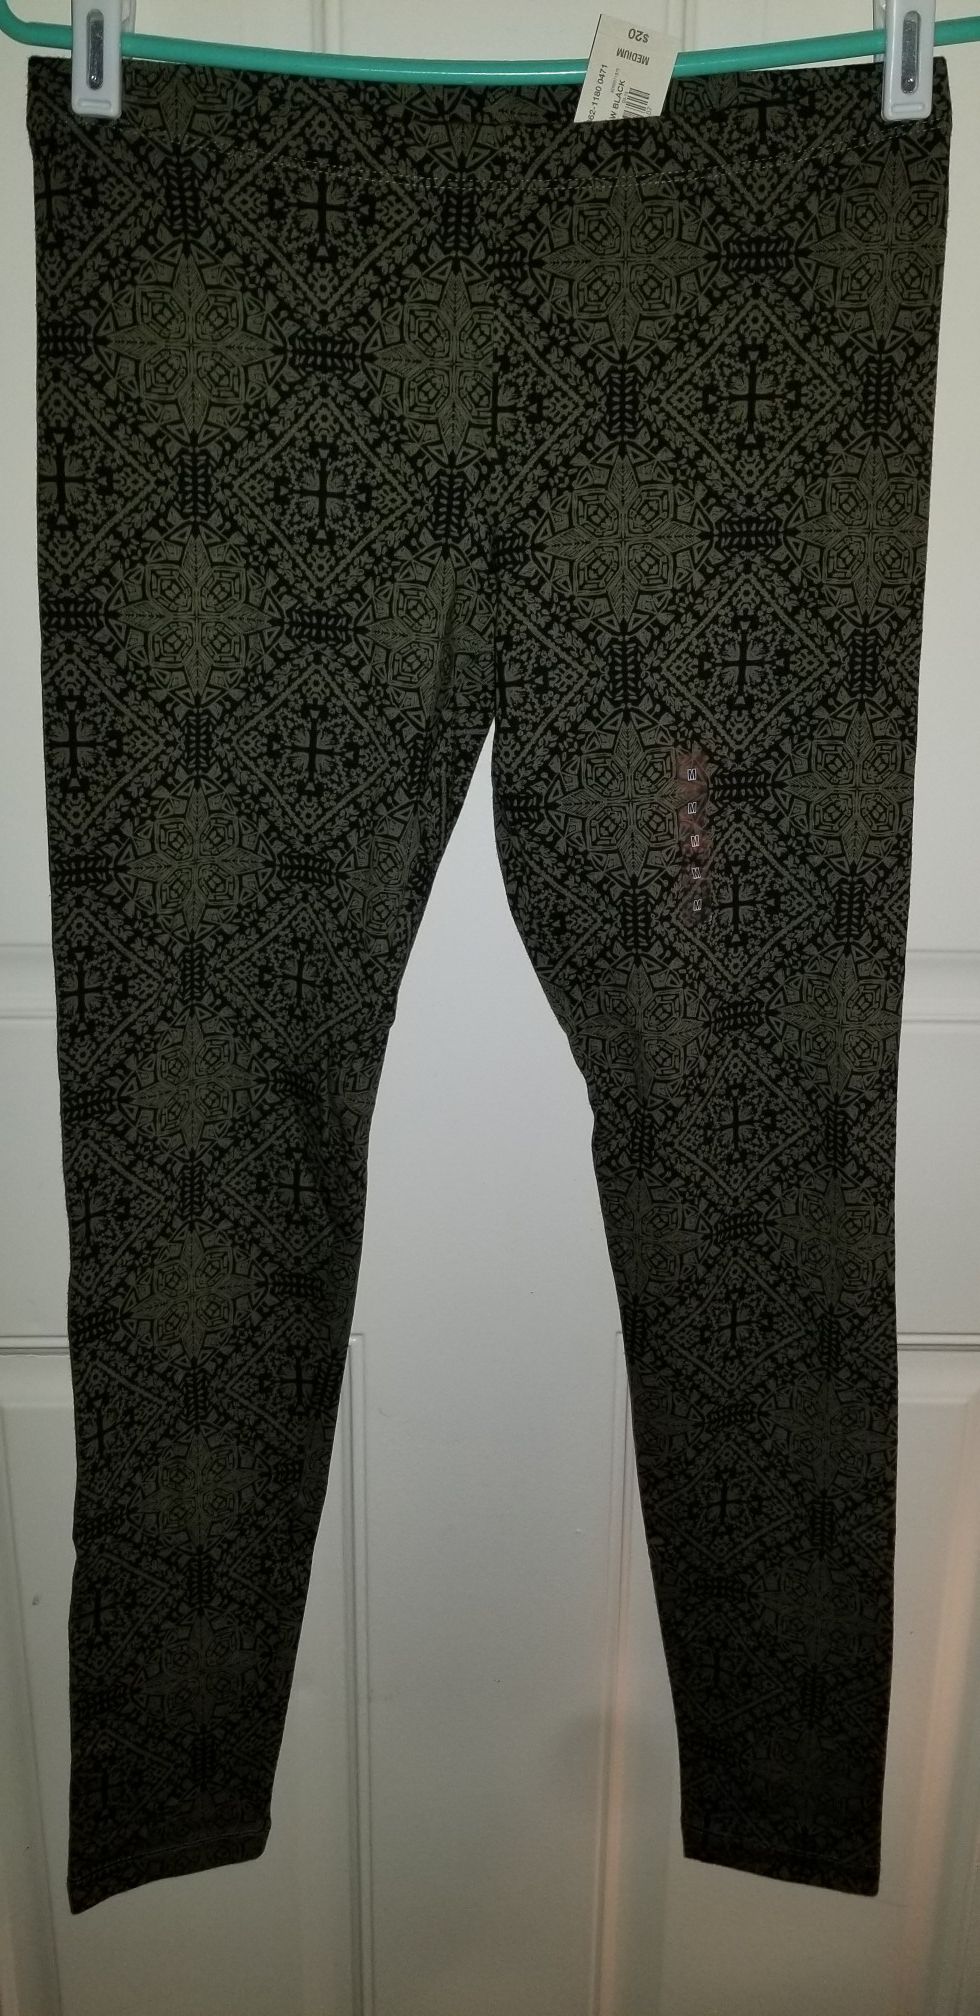 Leggings BRAND NEW WITH TAGS SIZE MEDIUM